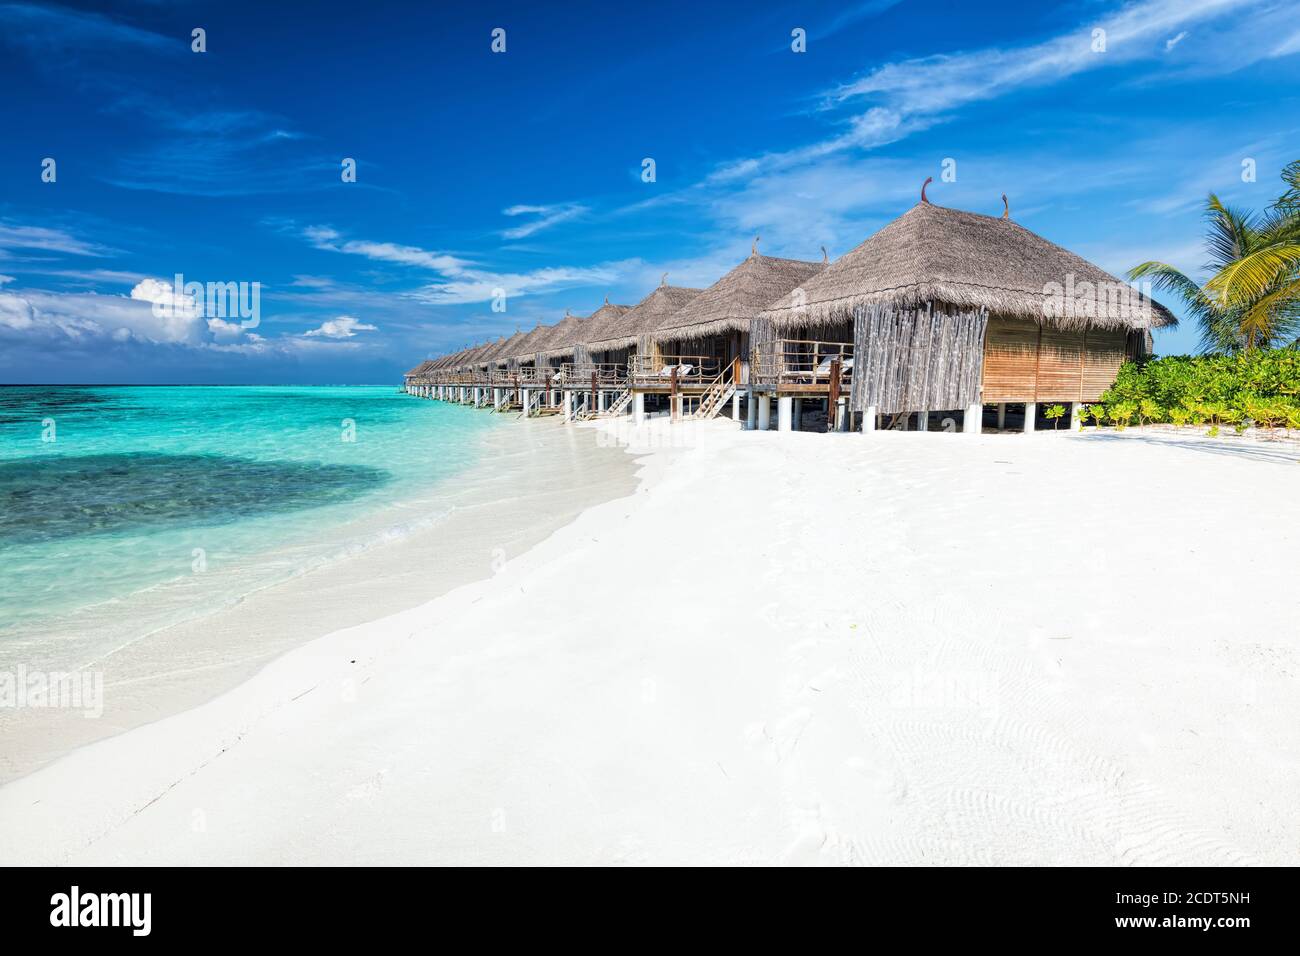 Beach and water villas on a small island resort in Maldives, Indian Ocean. Stock Photo